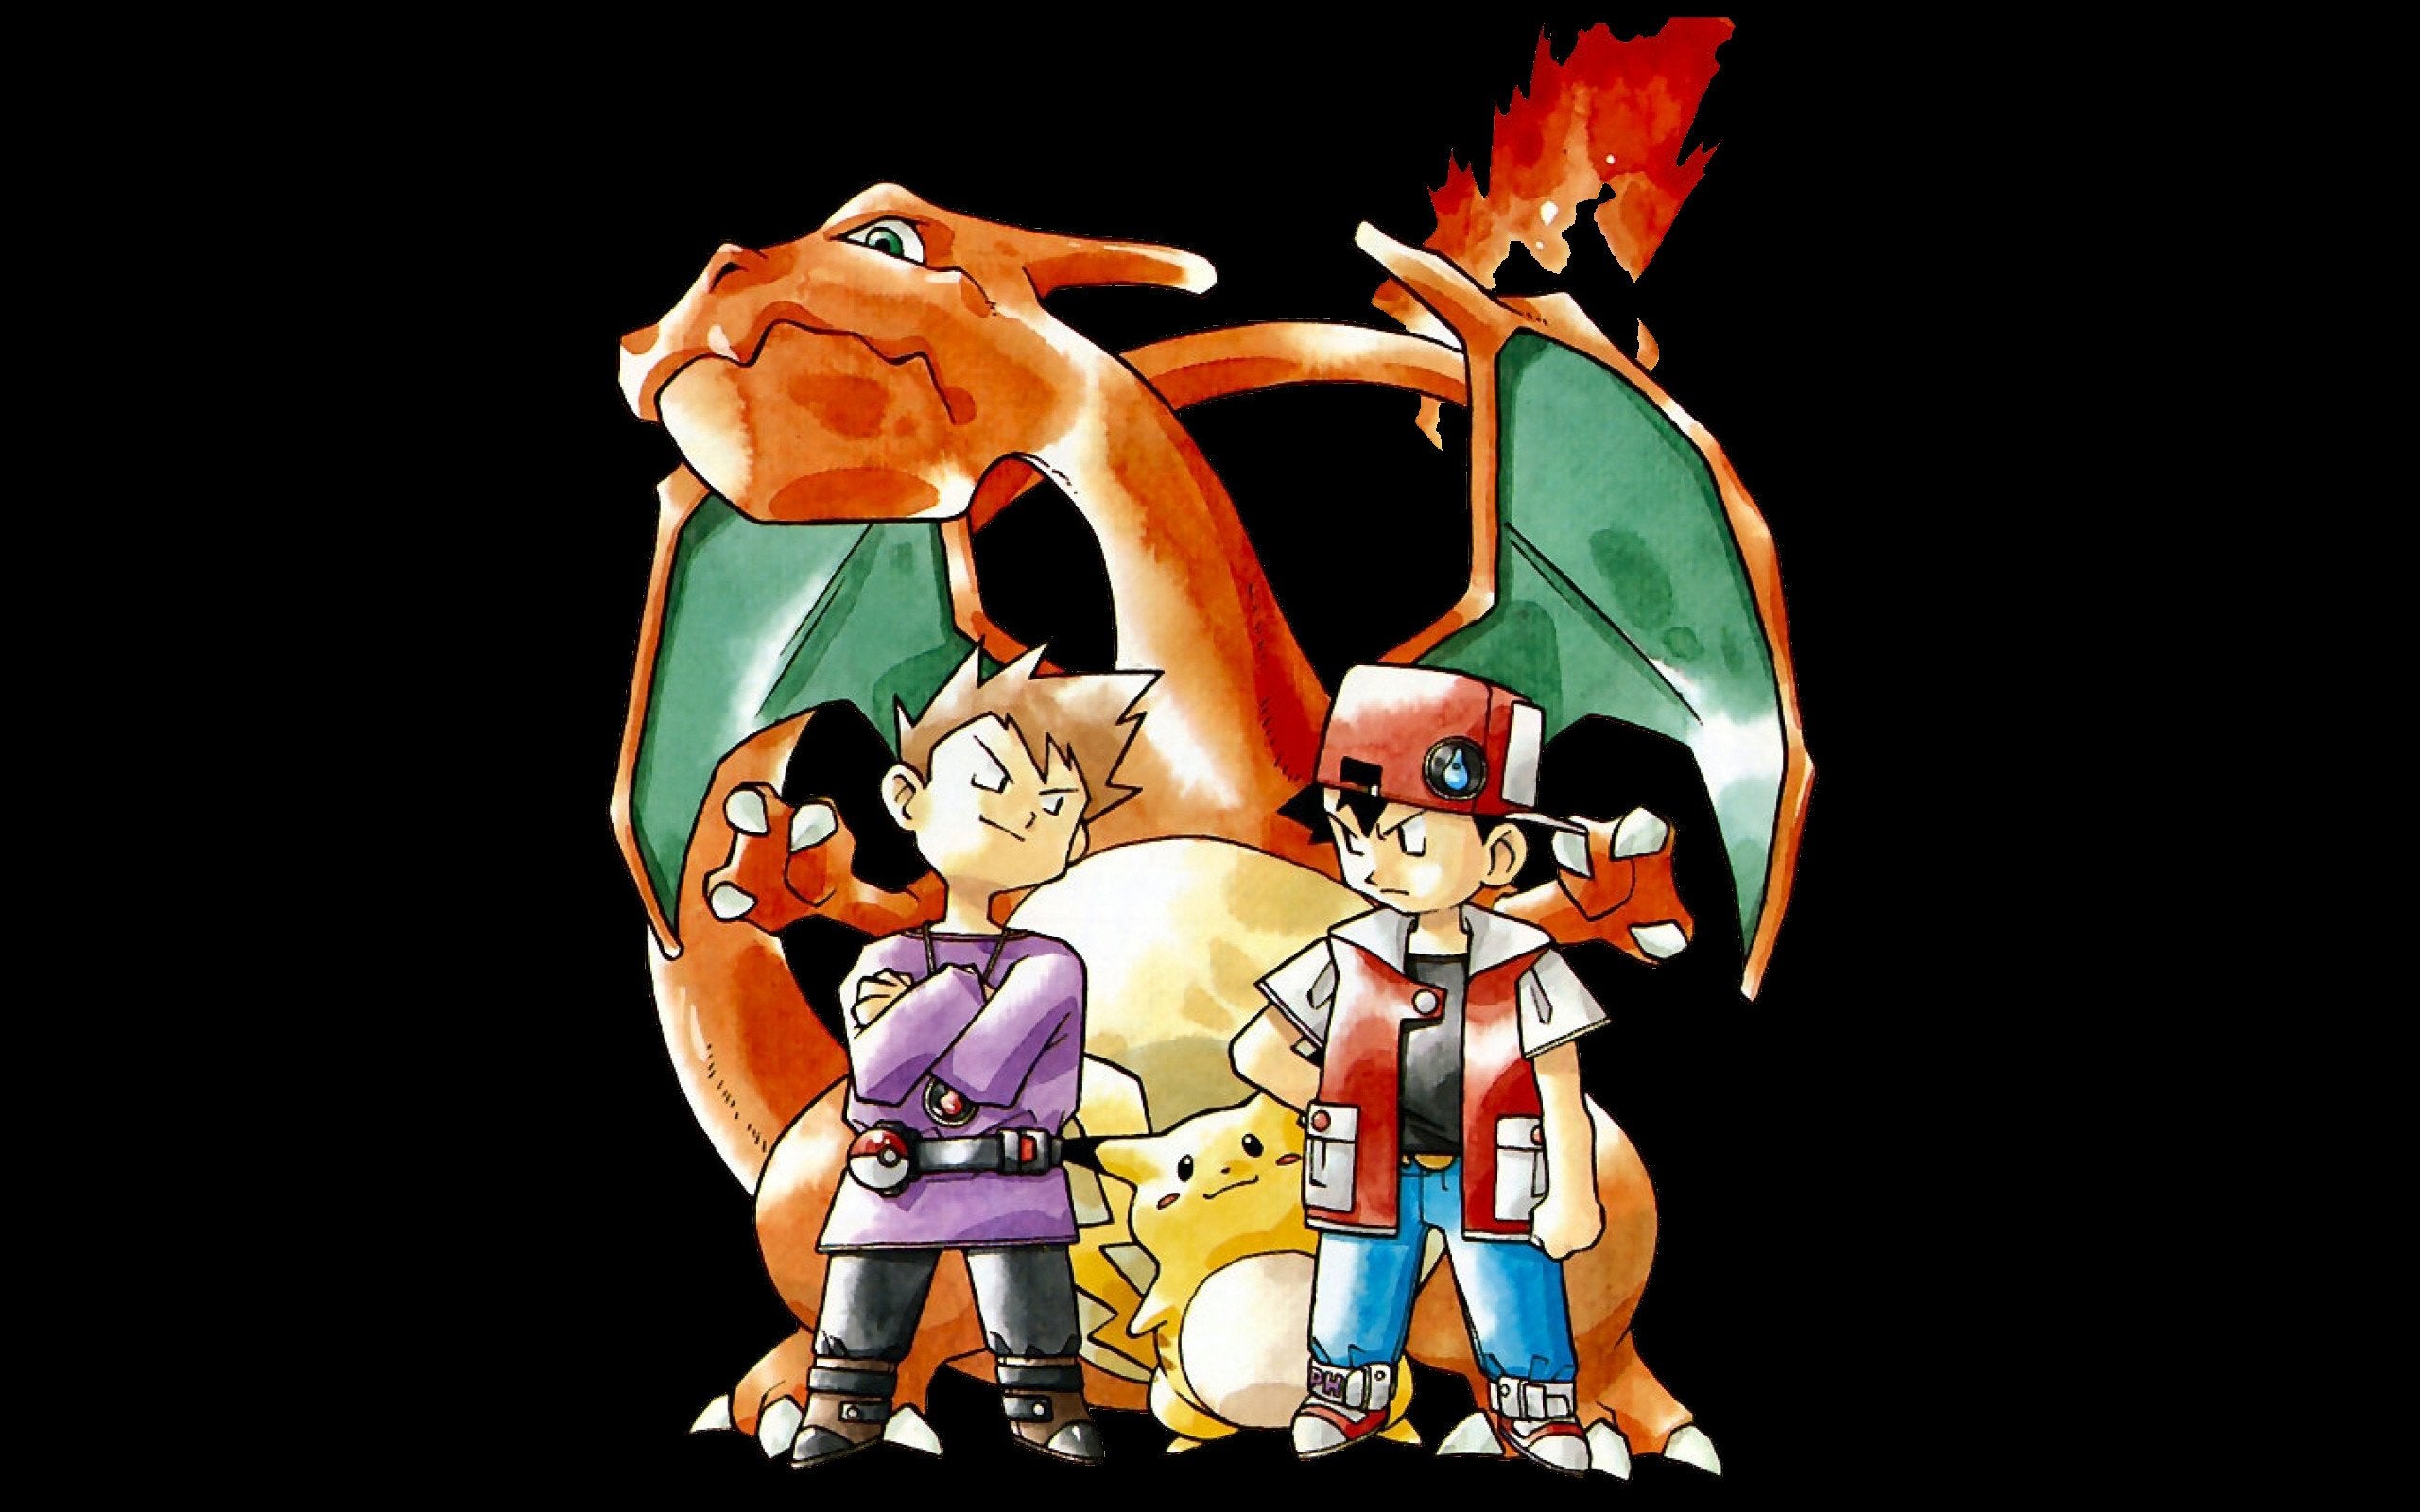 My retro Pokemon Red & Blue wallpaper. Super high resolution. (Also make note of how different Pikachu and Charizard look)